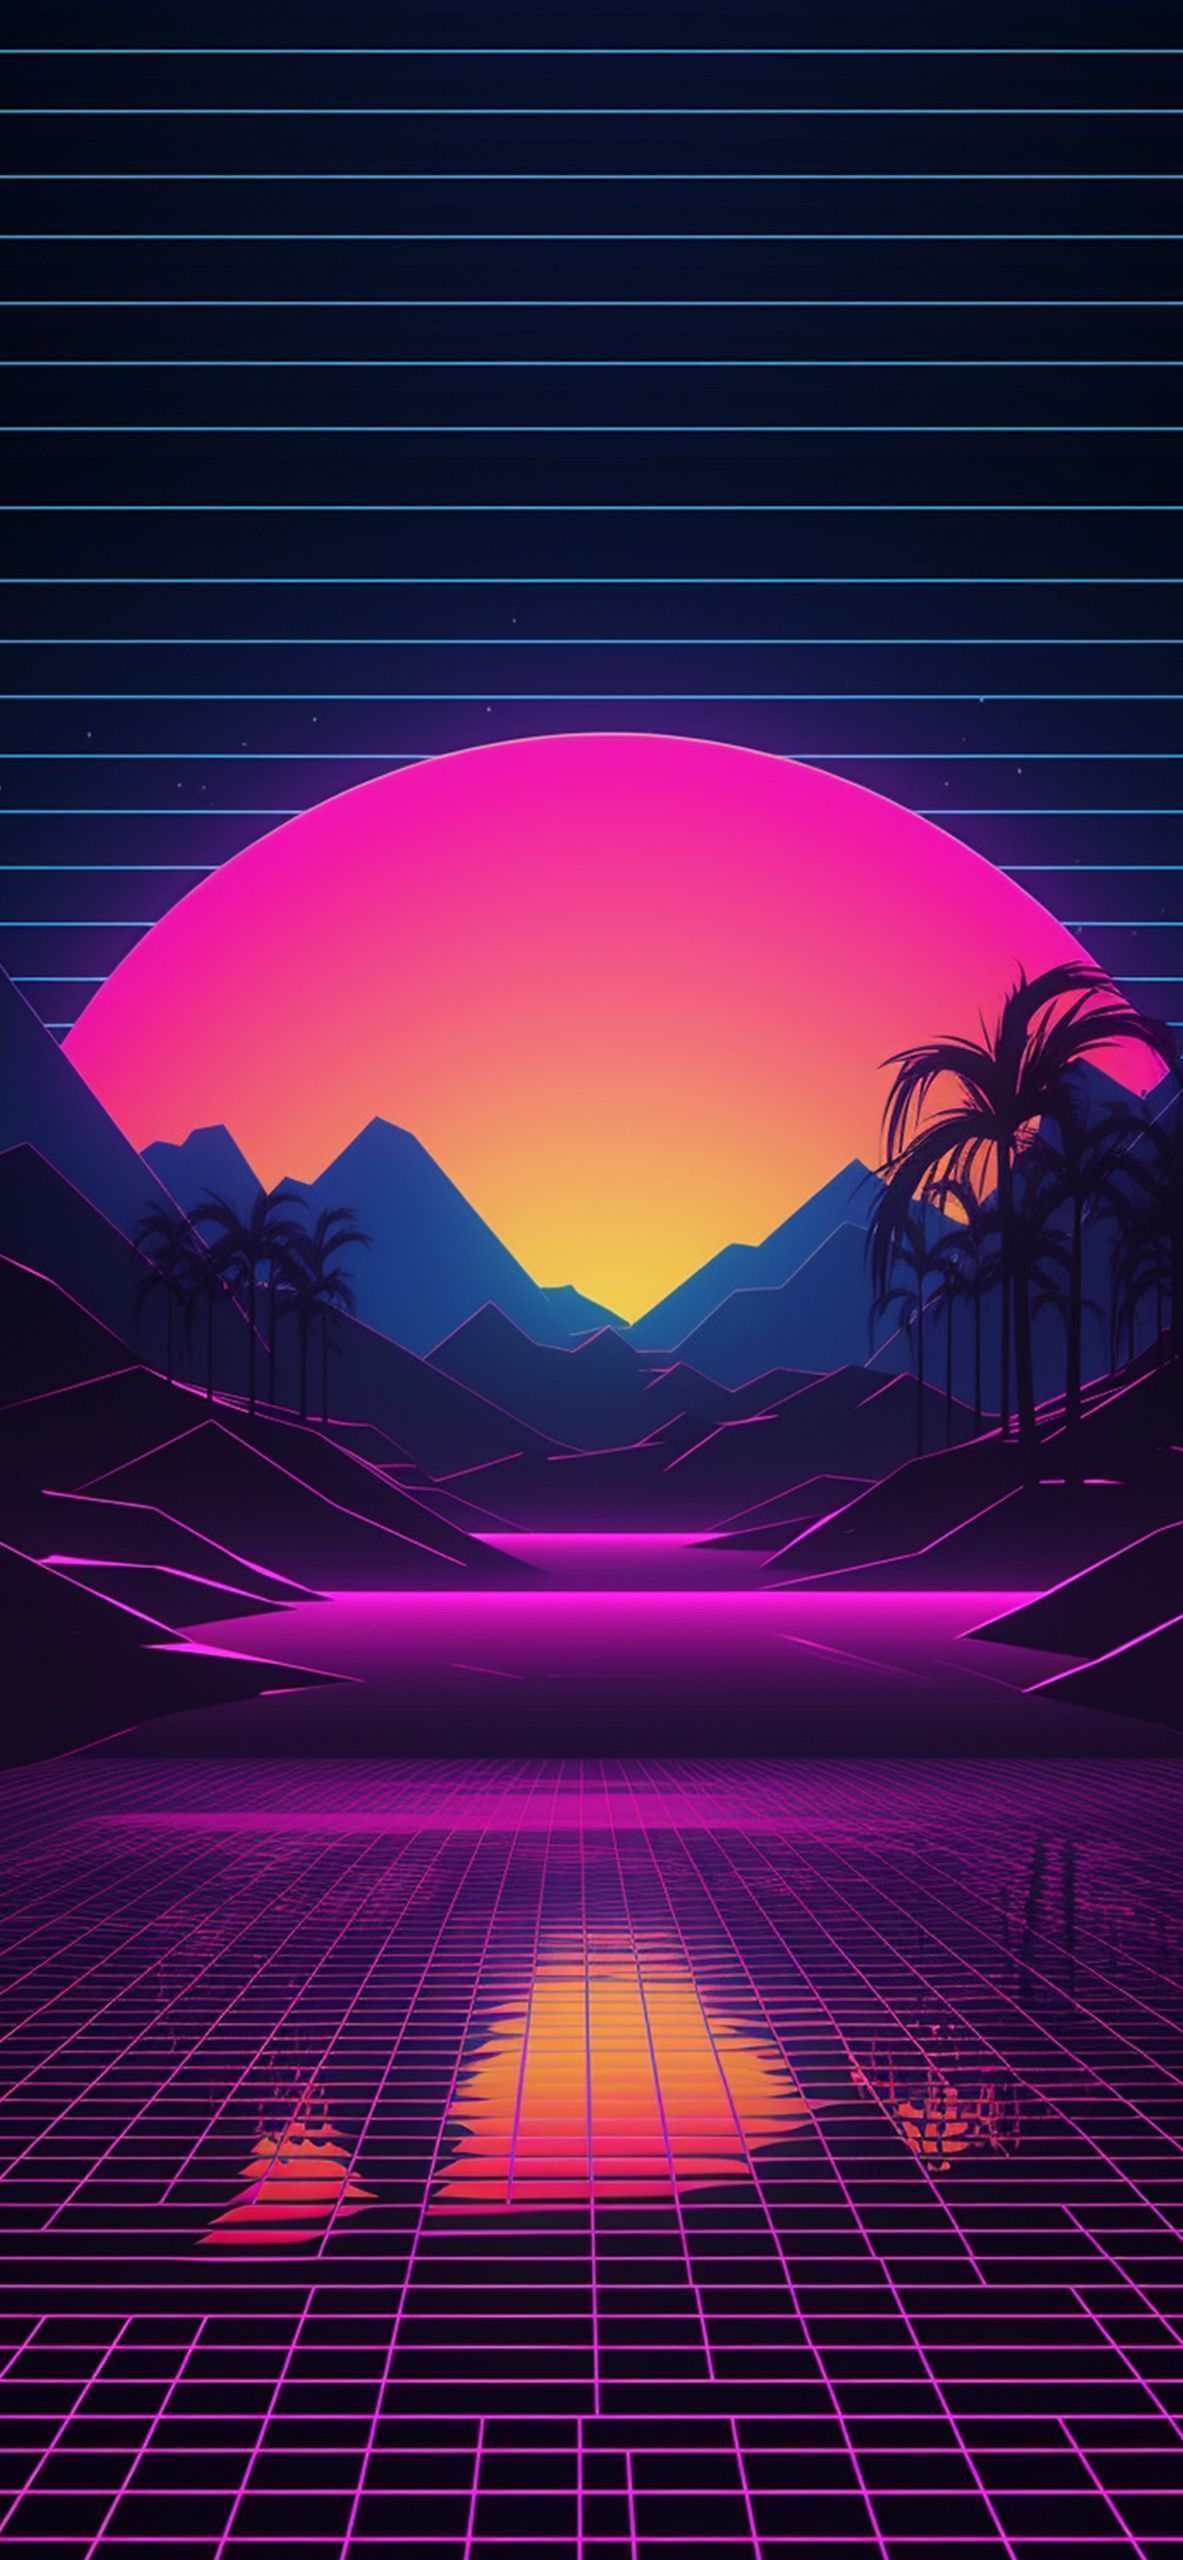 Synthwave Mountain & Sunset Wallpaper